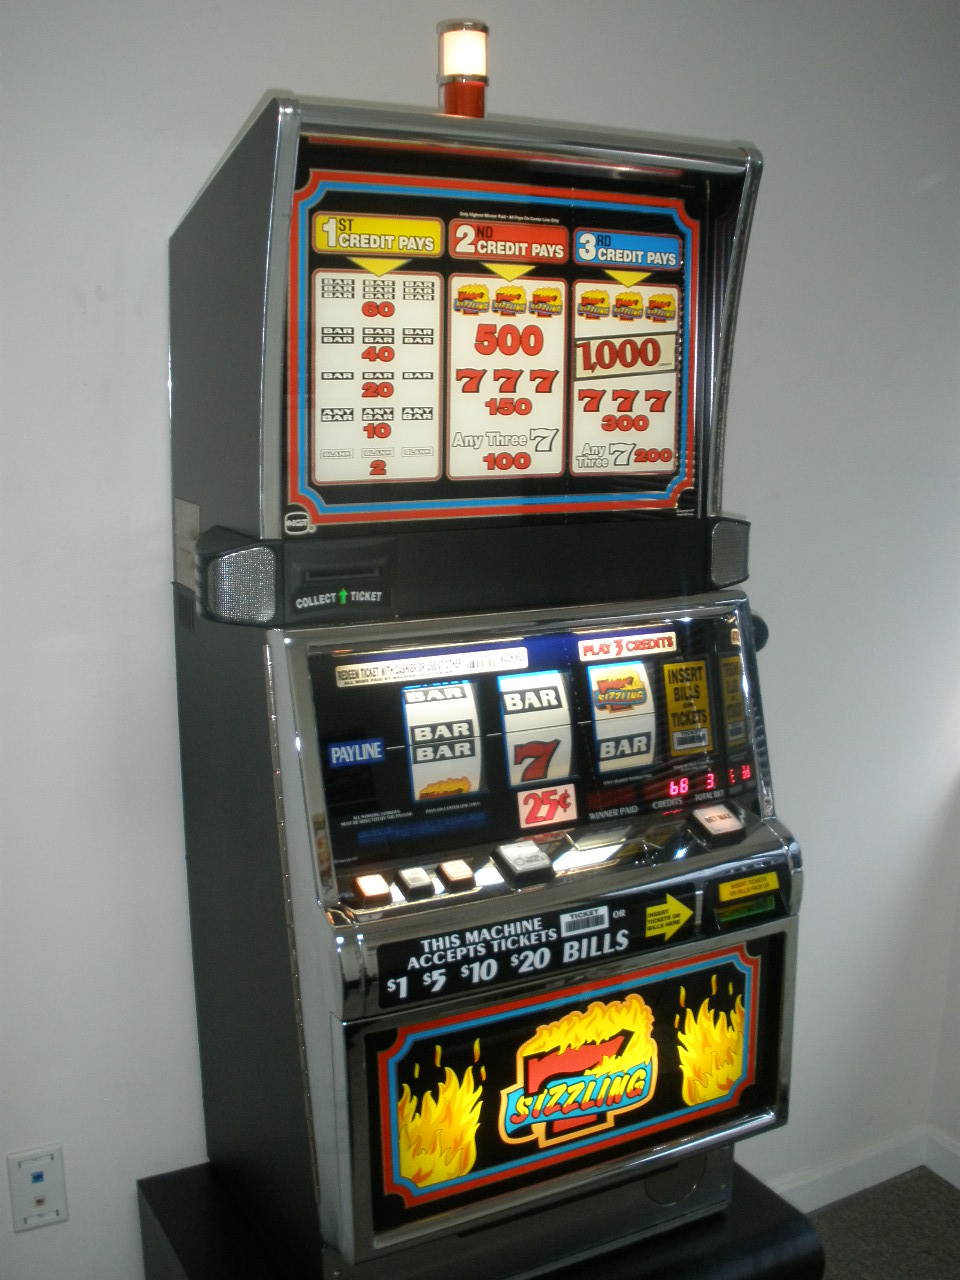 IGT SIZZLING 7s S2000 SLOT MACHINE - CASINO TOP For Sale • Gambler's Oasis USA